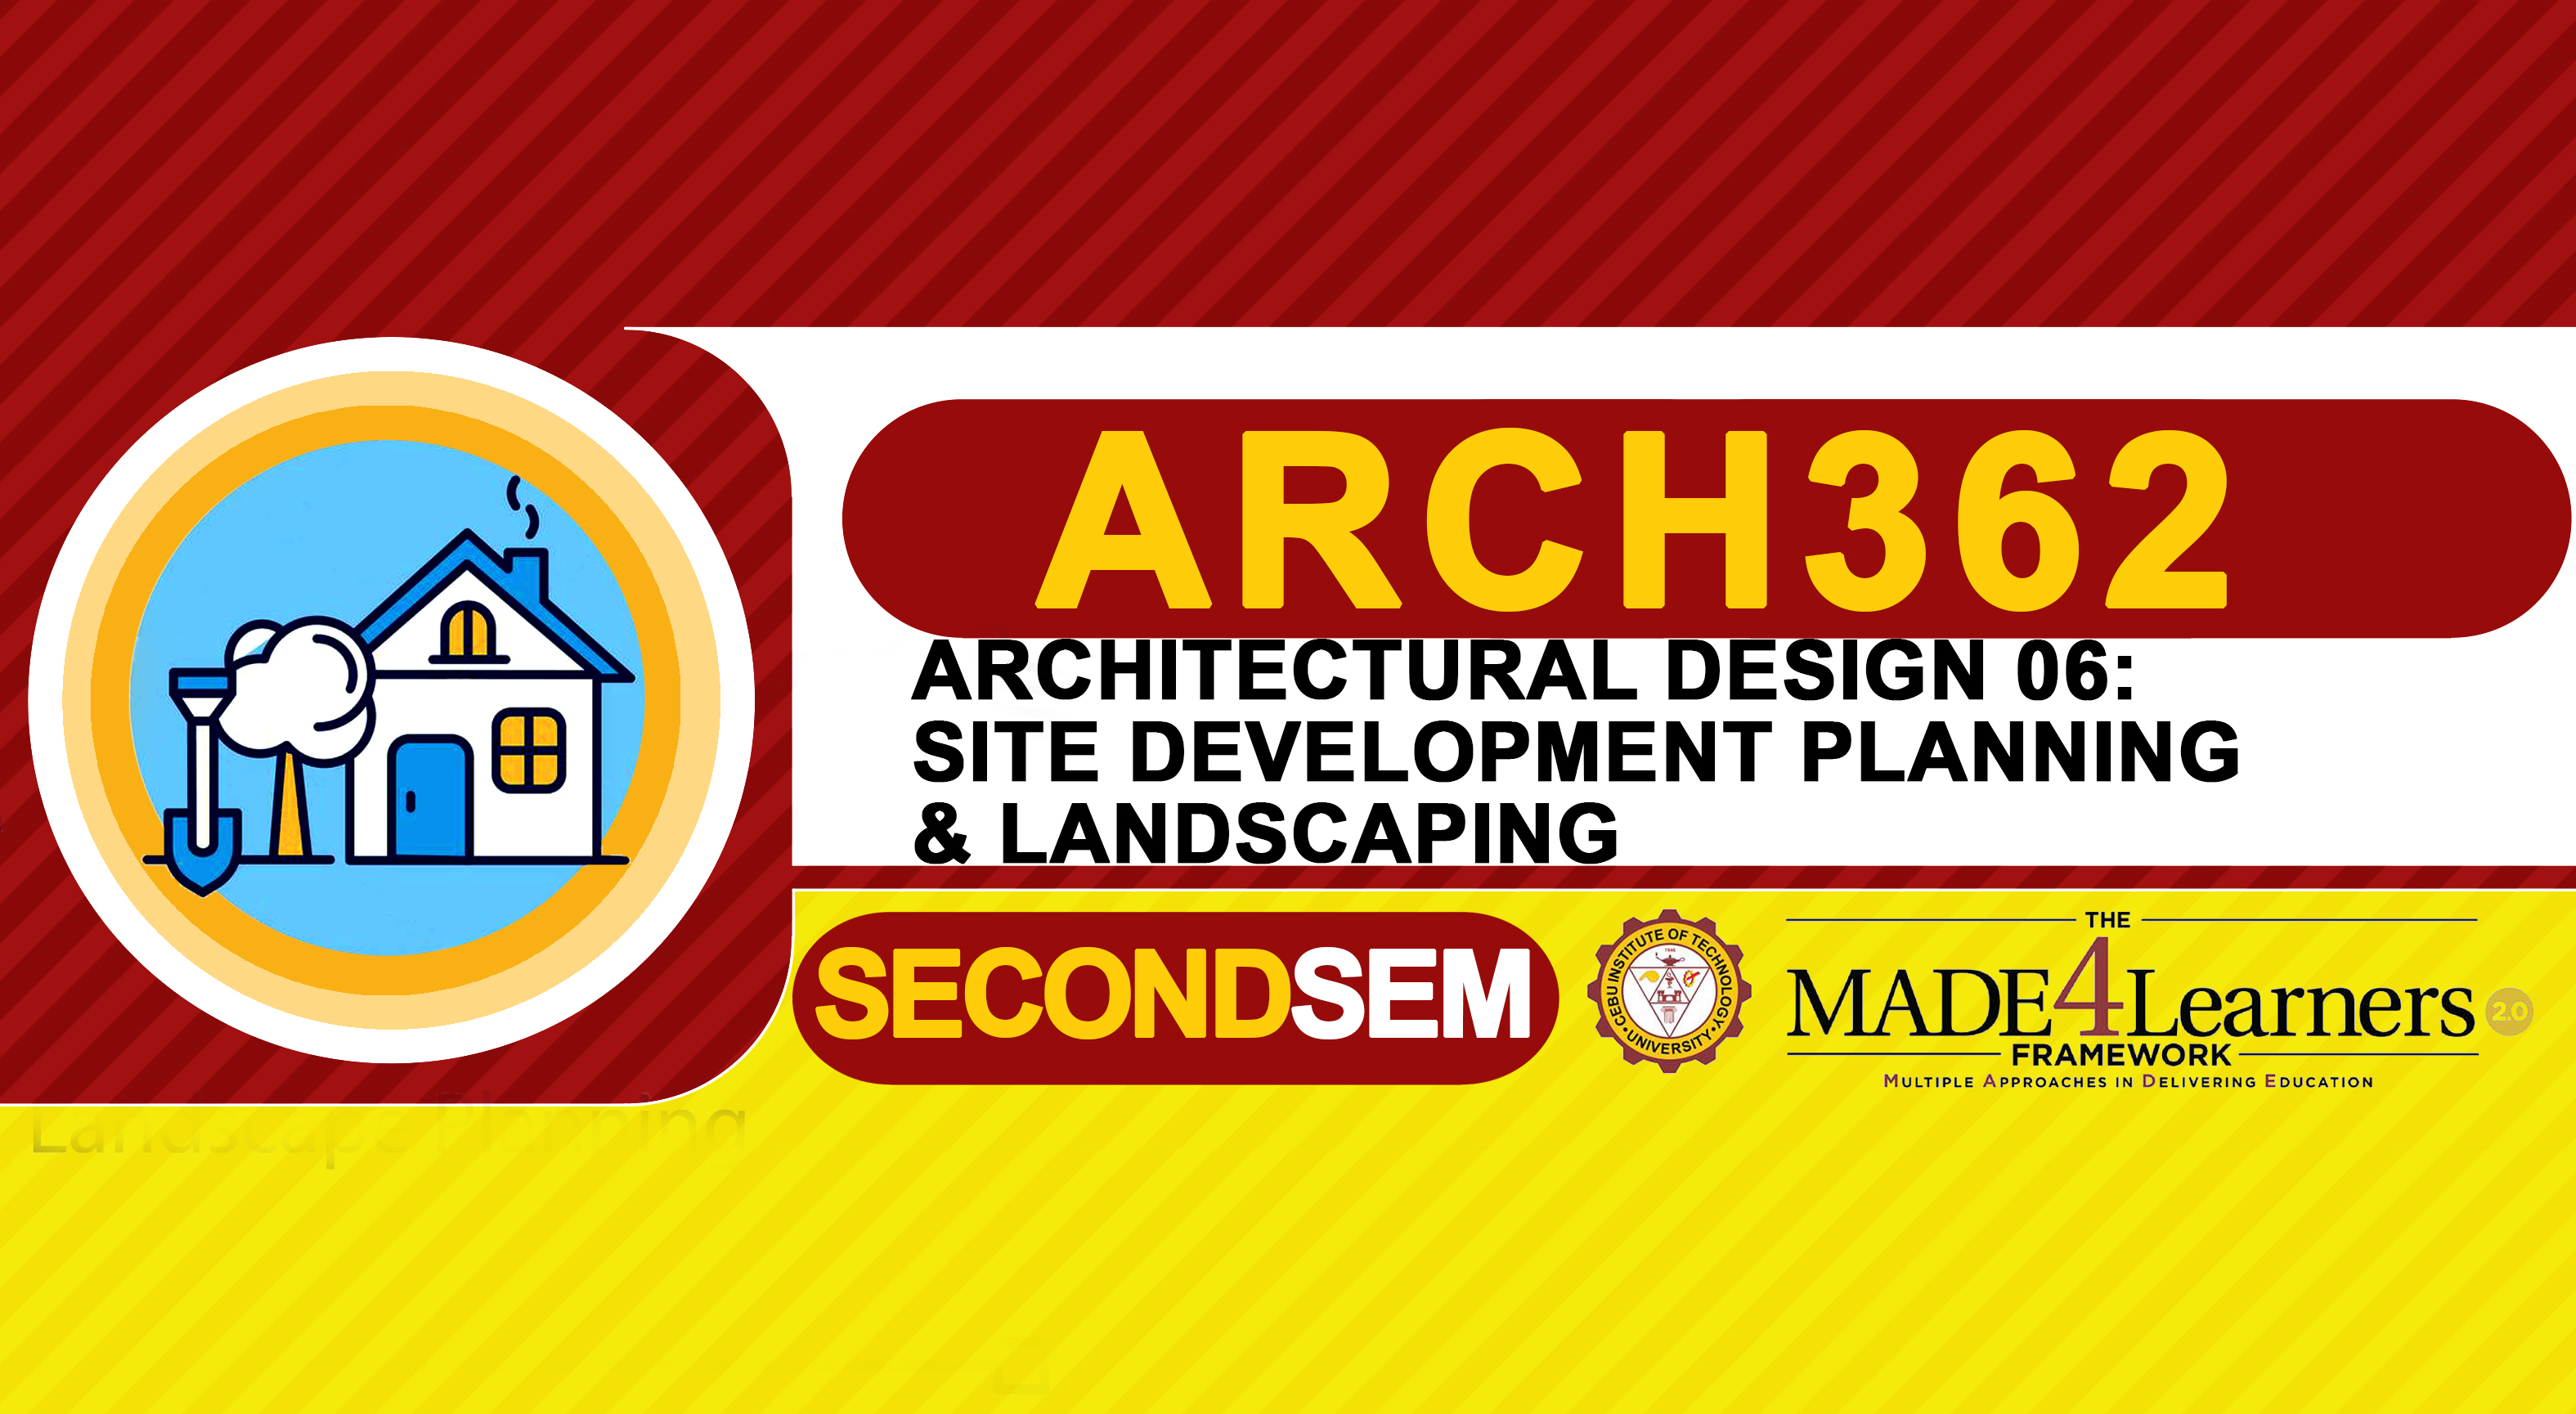 ARCH362: ARCHITECTURAL DESIGN 6 - Site Development Planning and Landscaping